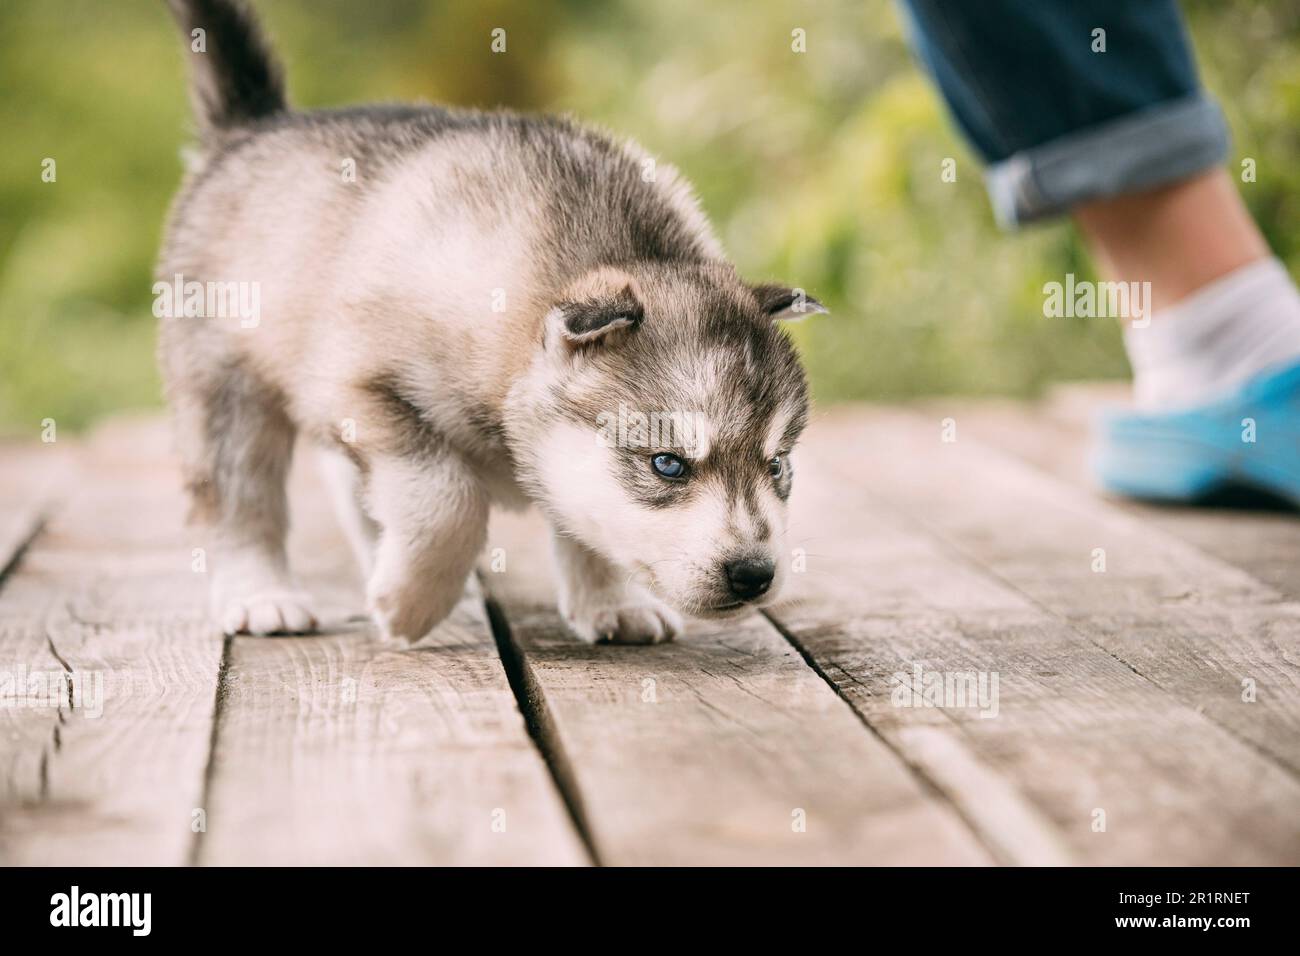 Four-week-old Husky Puppy Of White-gray Color Sitting On Wooden Ground And Sniffs It. Stock Photo